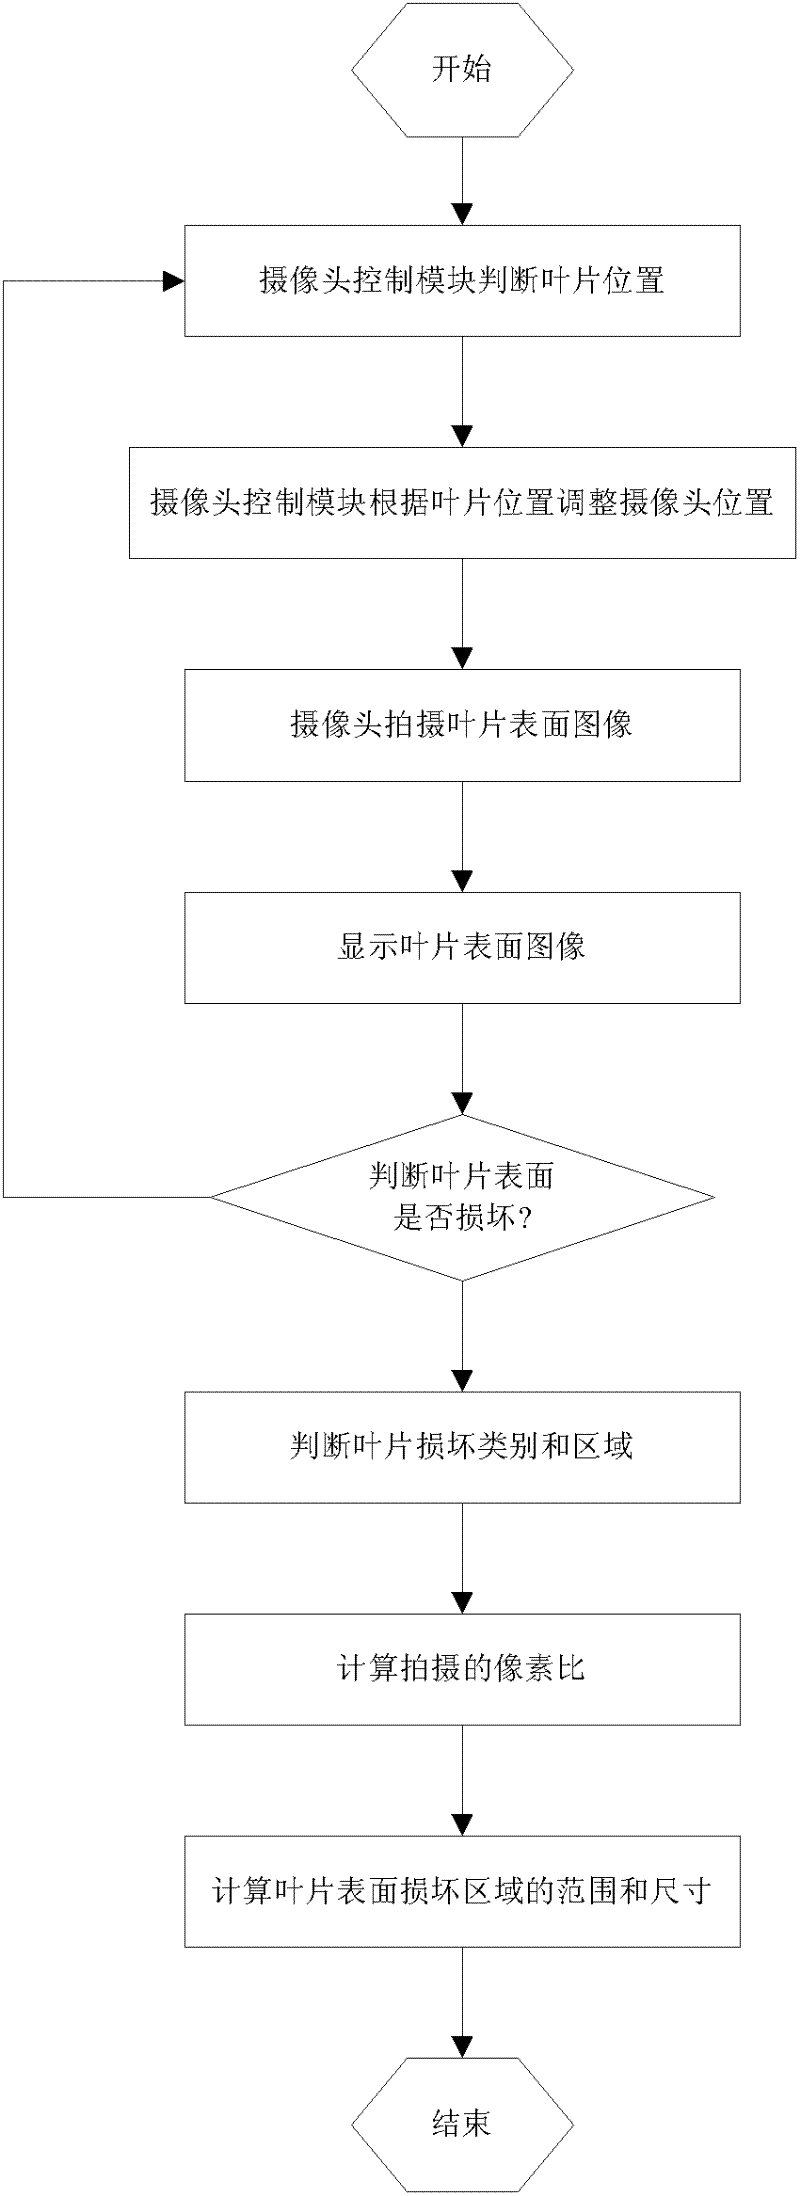 Real-time state monitoring and fault diagnosing system and method for blades of wind generating set